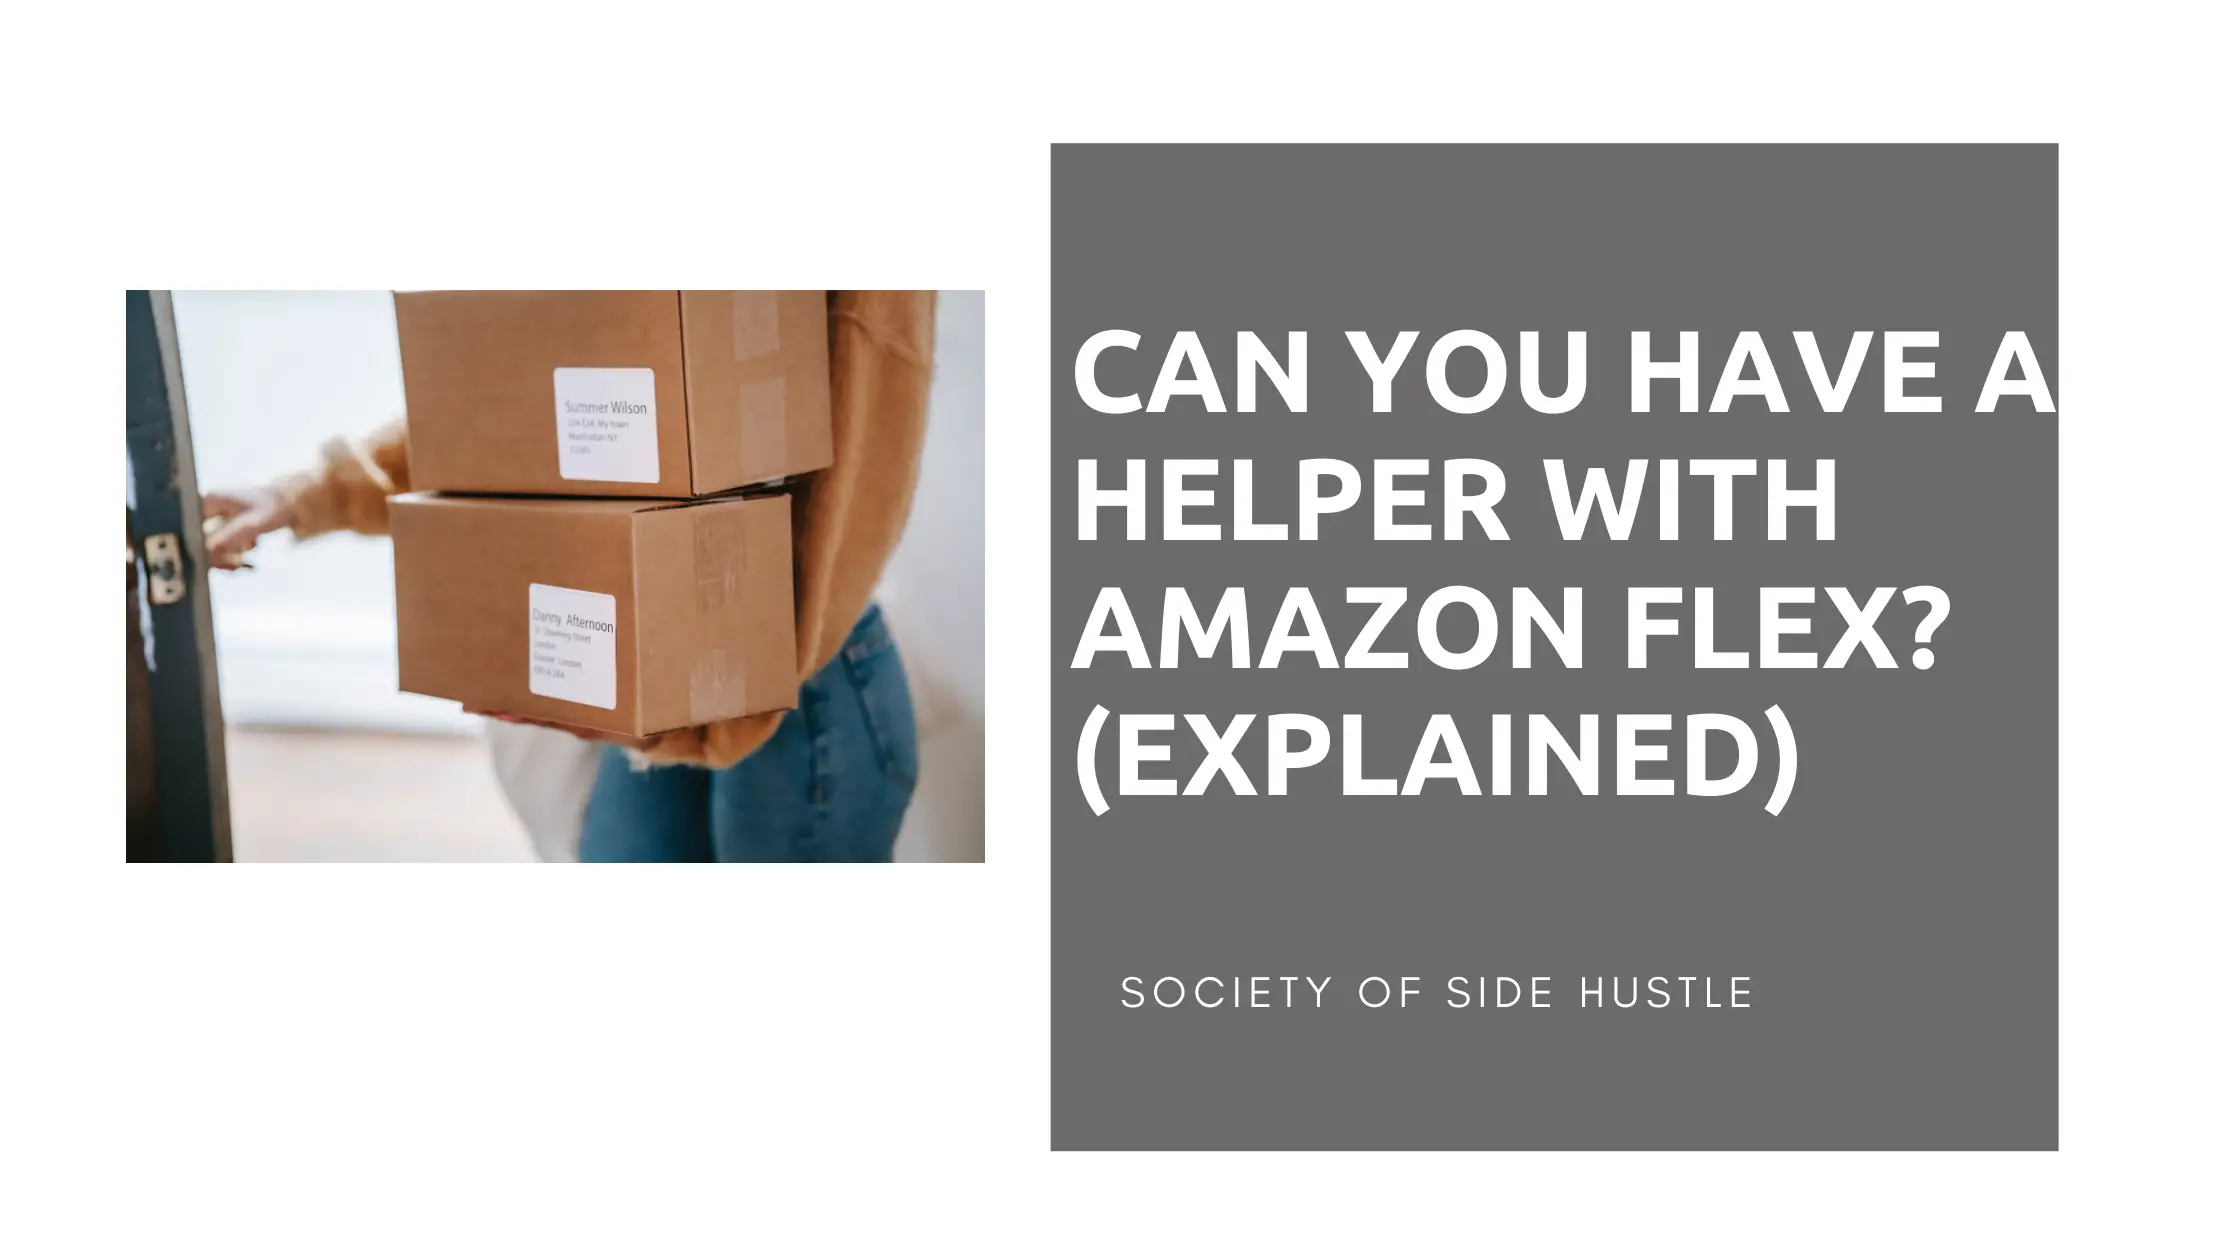 Can You Have a Helper With Amazon Flex? (Explained)